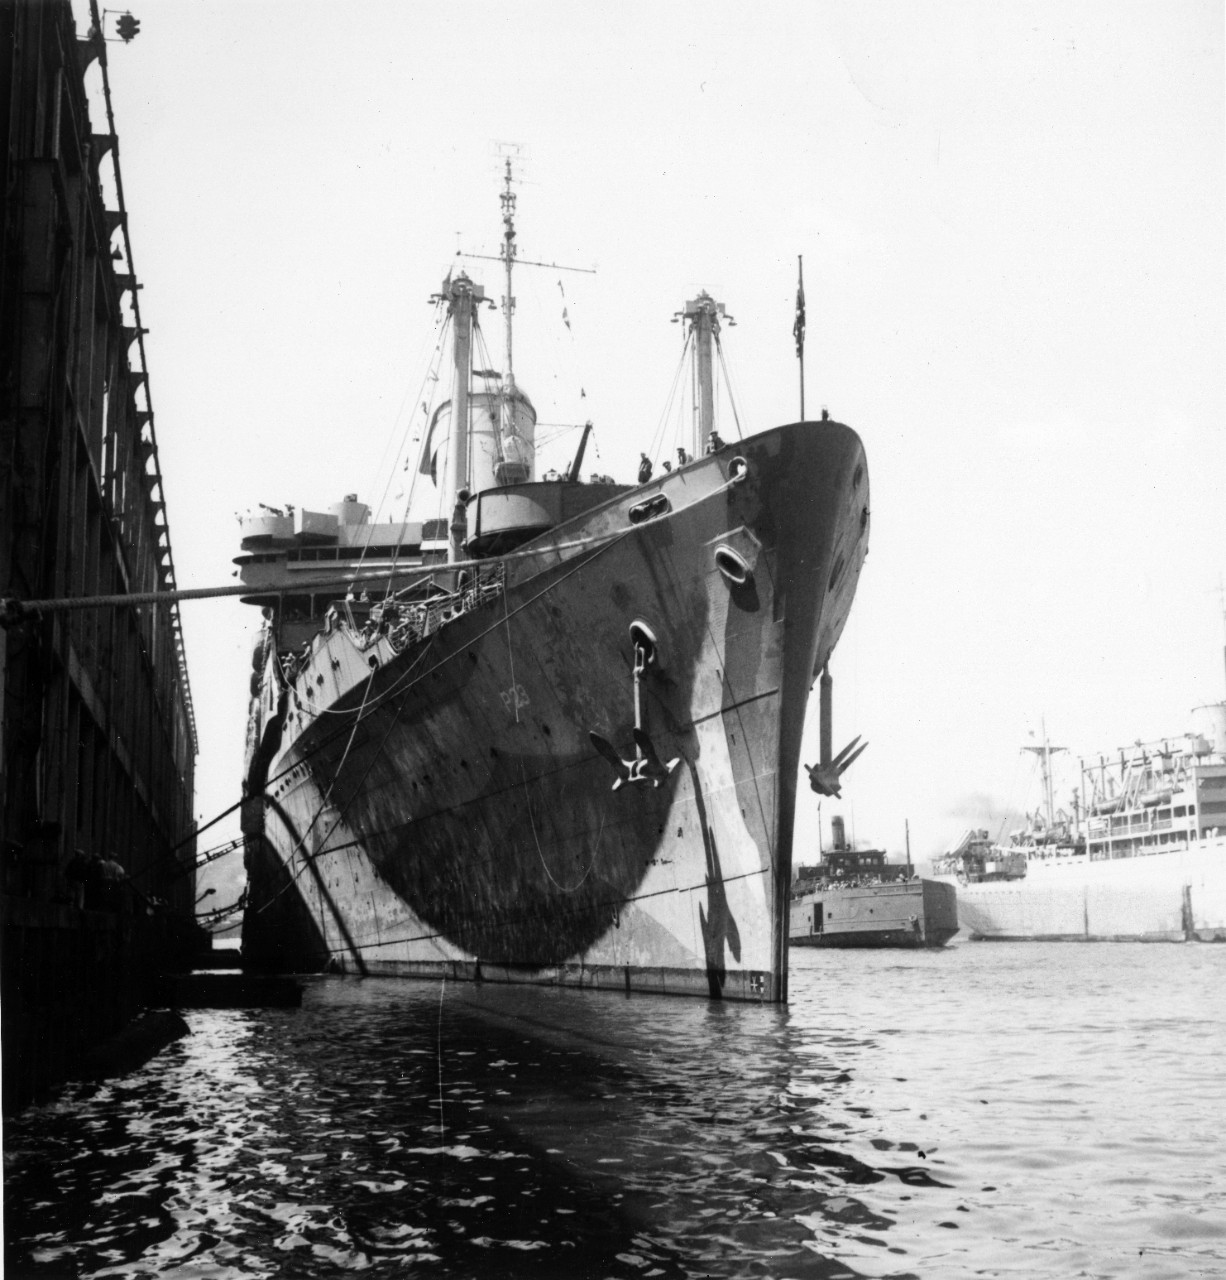 Arrival of transport USS West Point (AP-23), formerly the SS America, in New York - July 1945. 